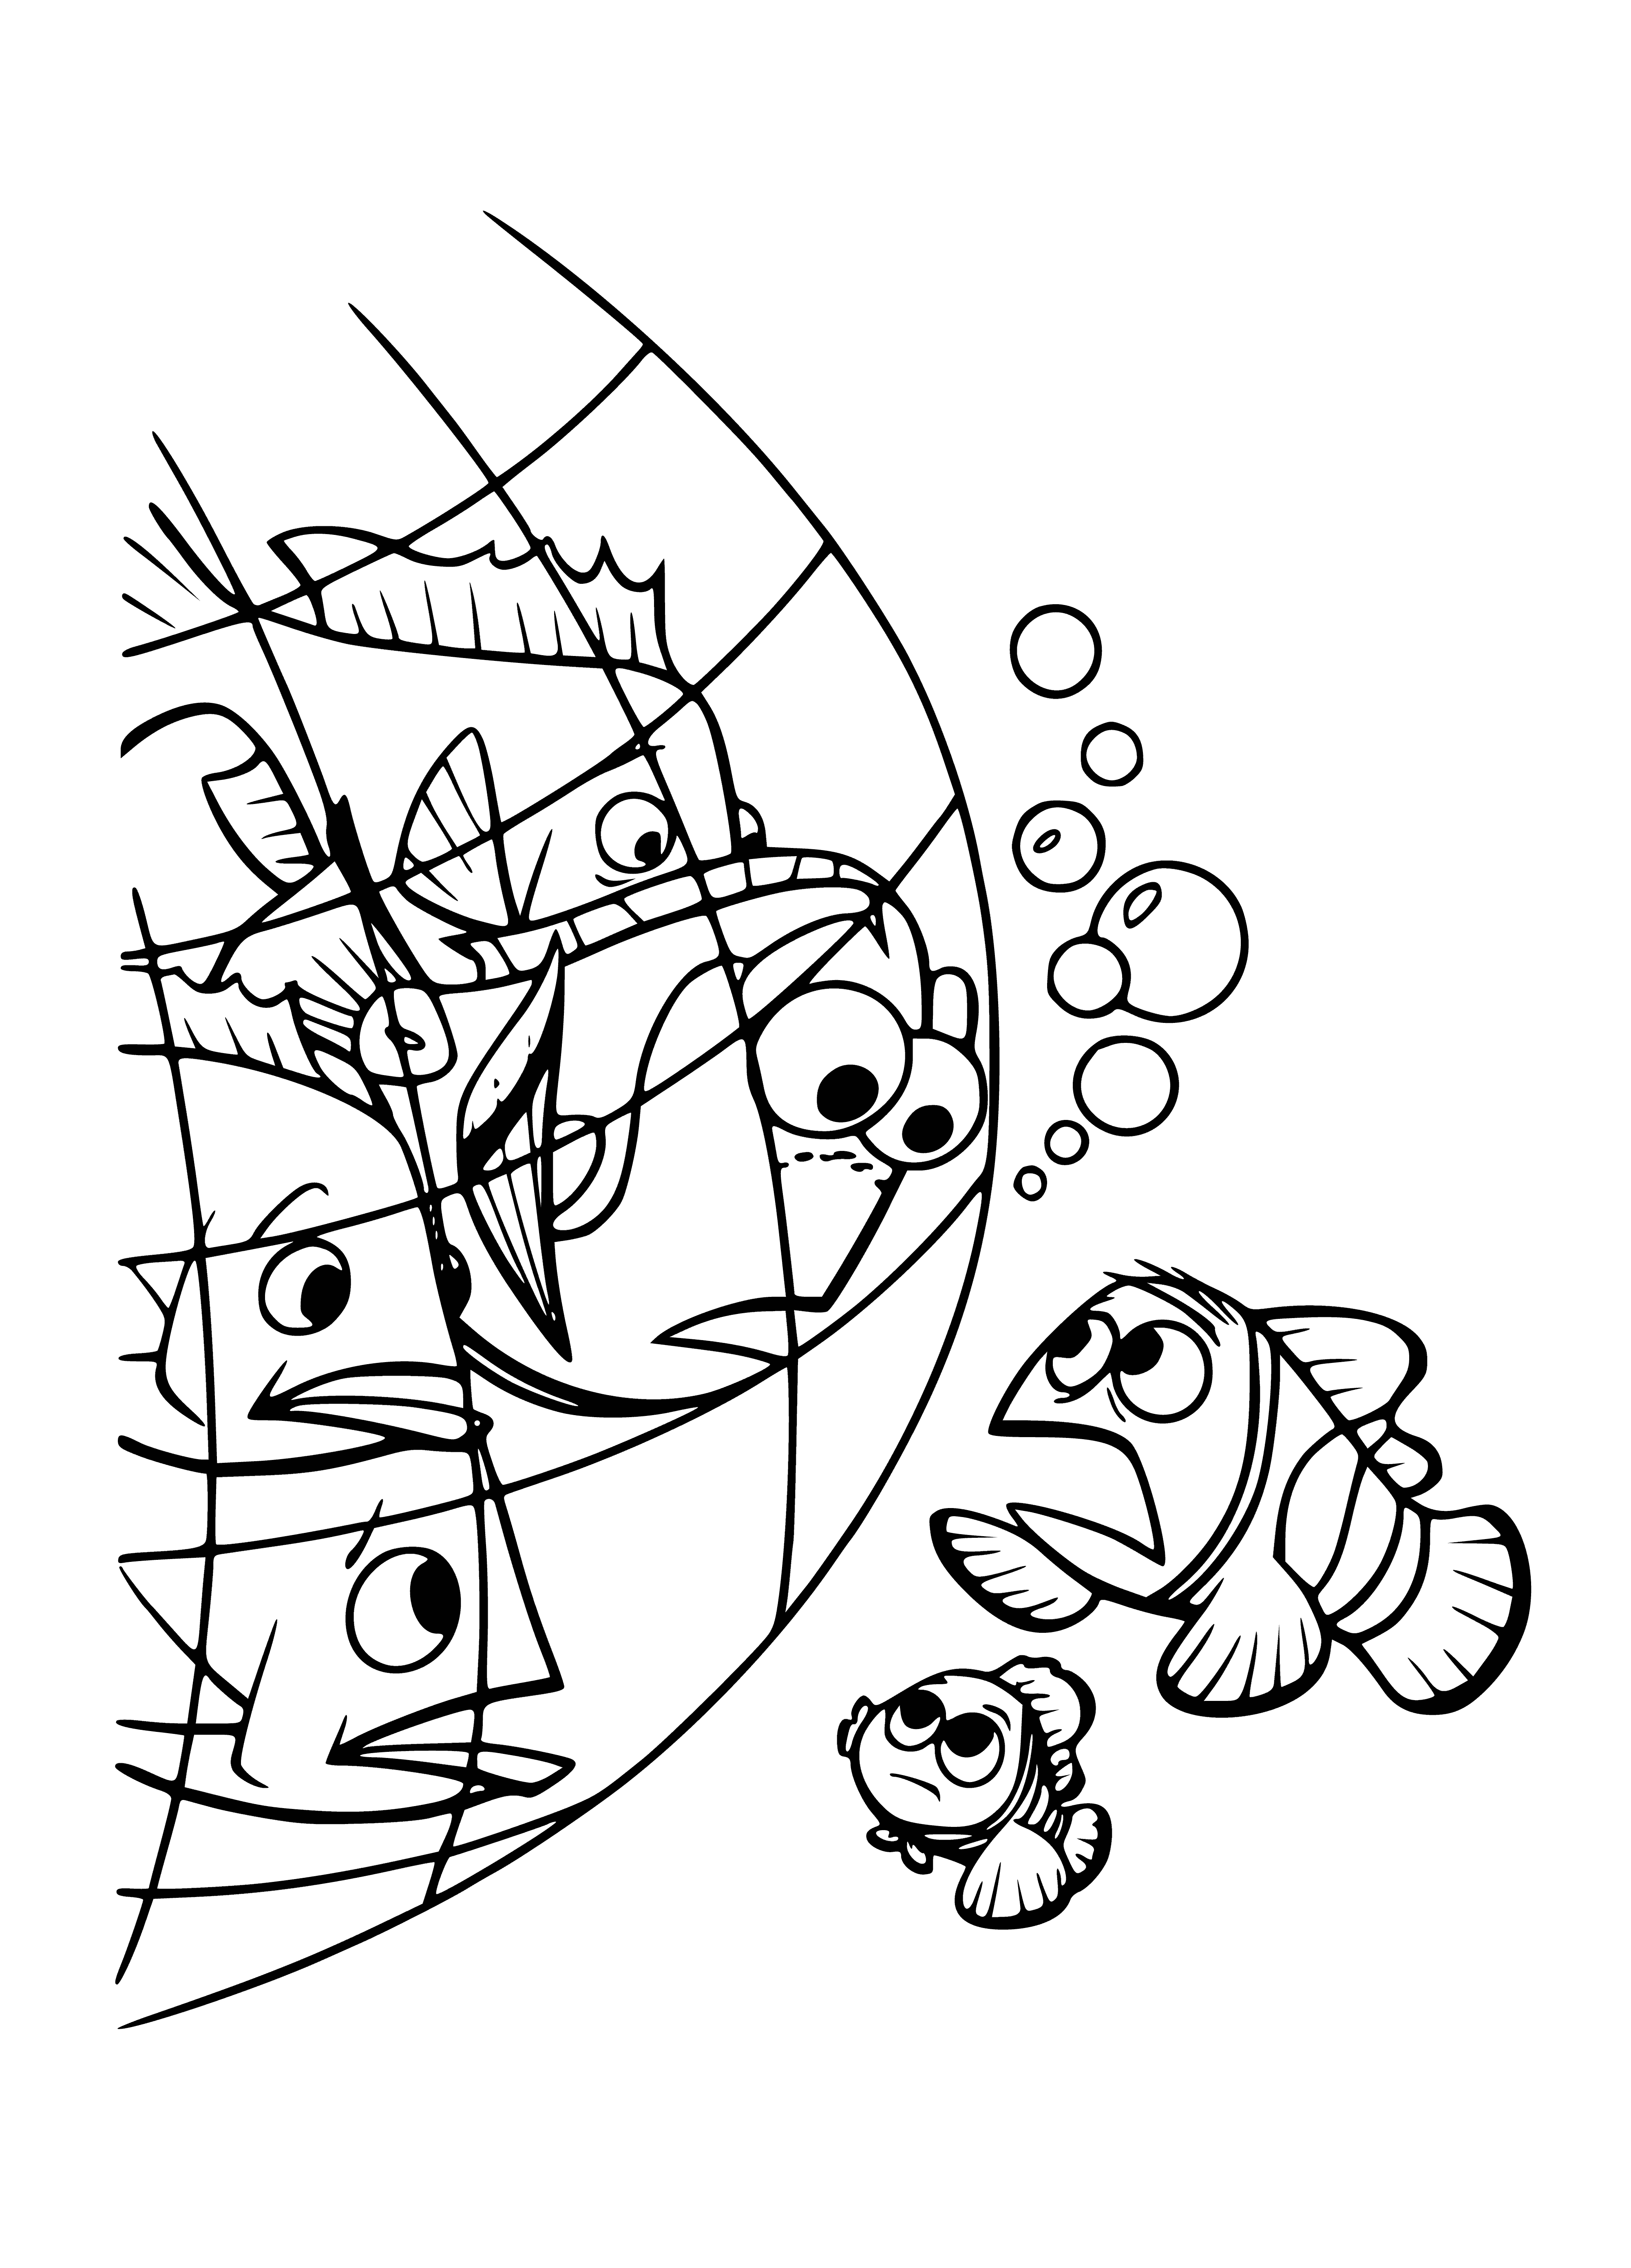 Even online coloring page